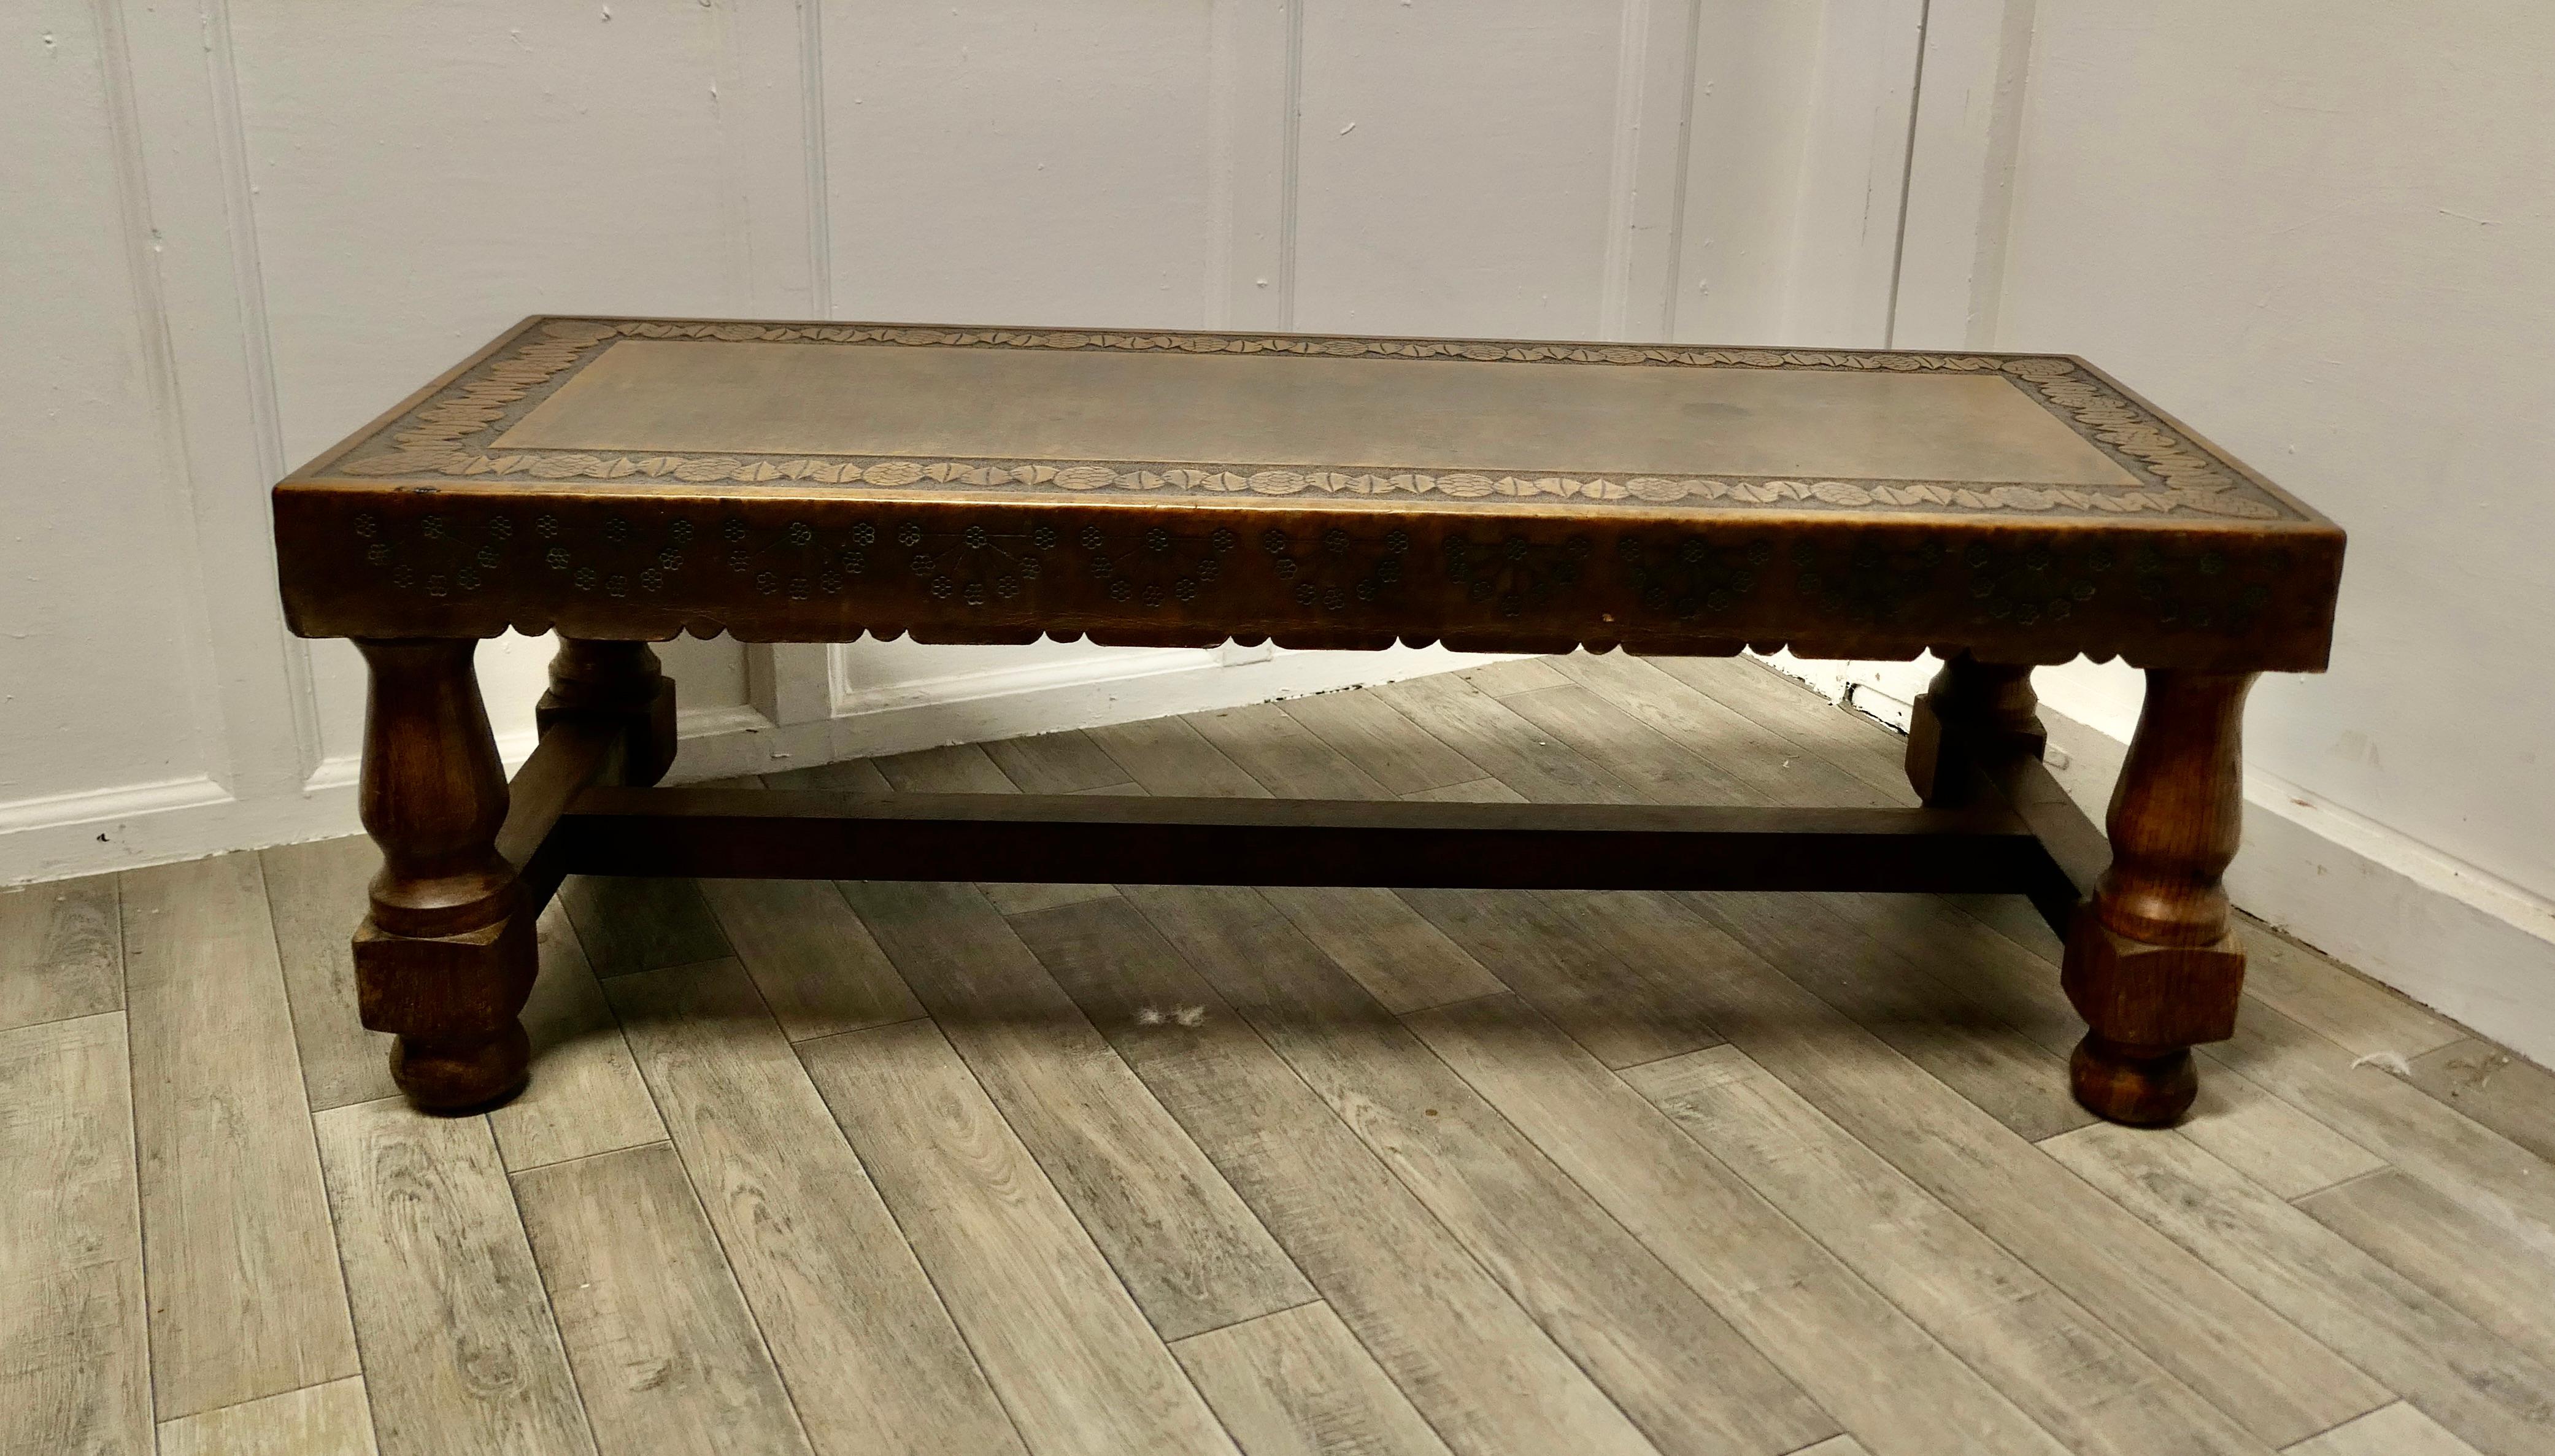 Spanish Oak and Leather Farmhouse Coffee Table

This is a traditional Spanish Farmhouse coffee table, the chunky legs are turned in oak, the top of the table is covered with very thick sculptured leather
As to condition, this table is very sound,